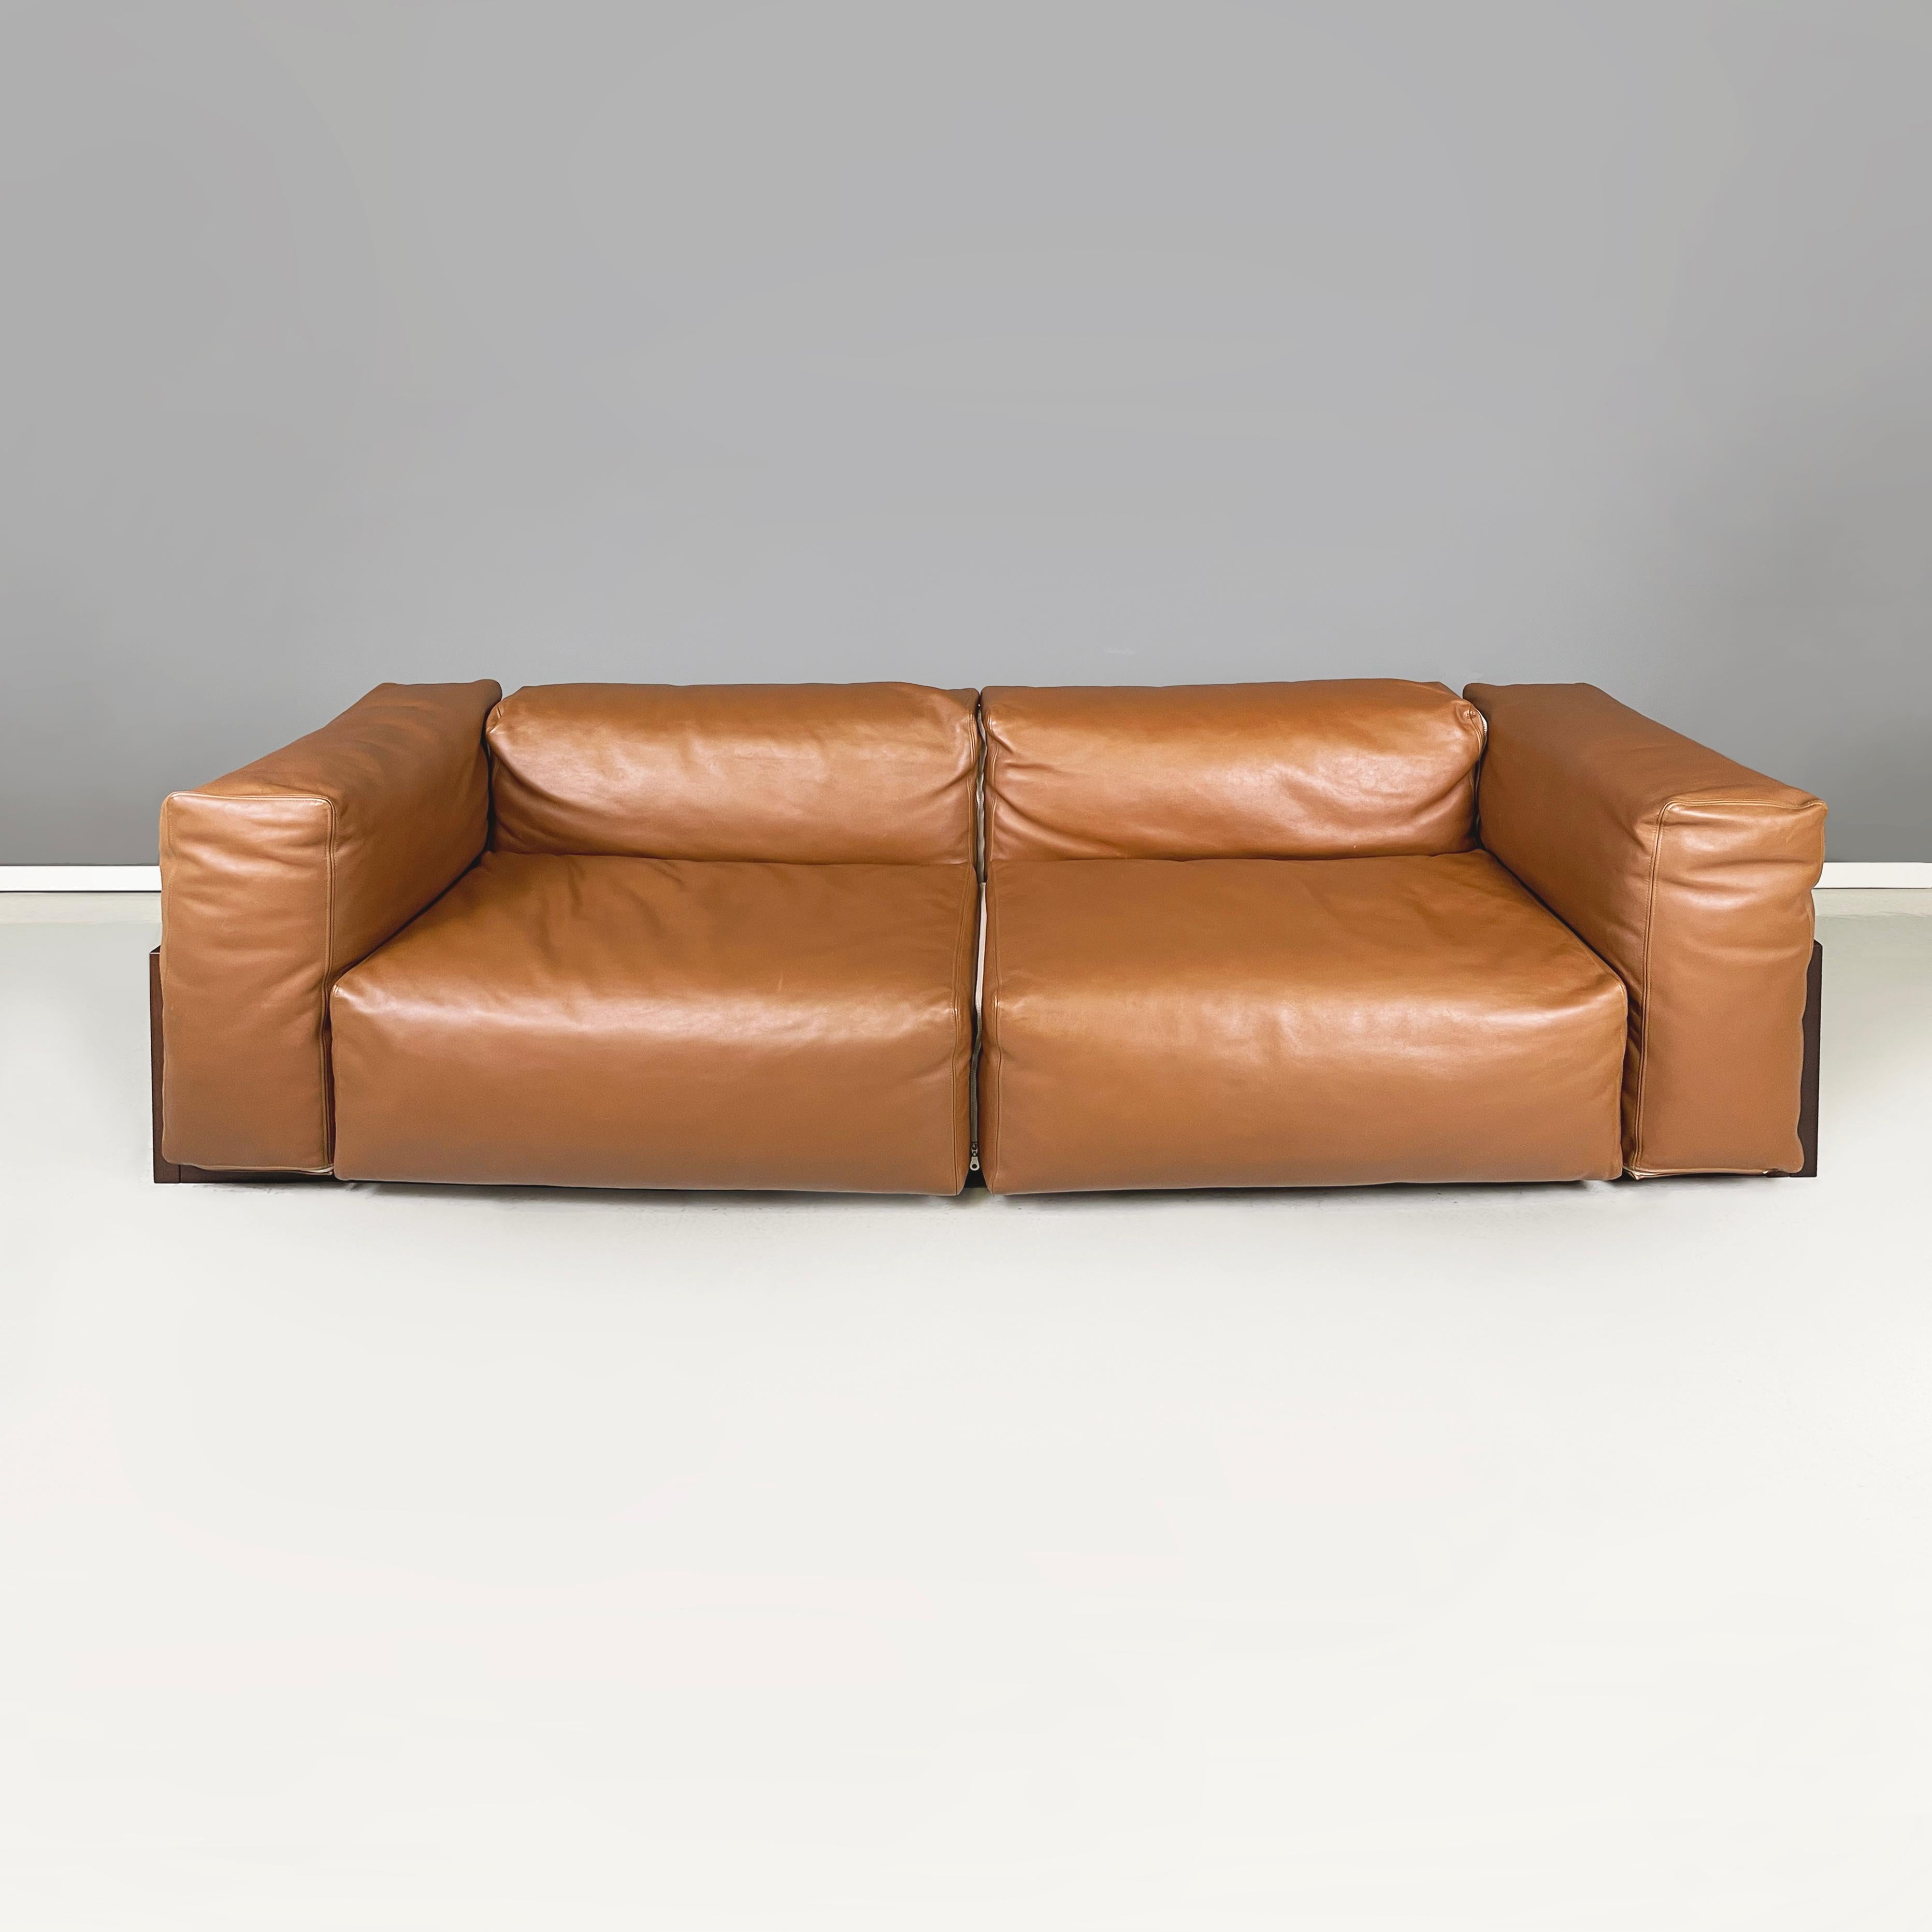 Italian post modern Brown leather and dark wood sofa by Cappellini, 2000s
Two seater sofa in brown leather. The square seat, backrest and armrest cushions are joined by a zip. The external structure of the sofa is in dark wood. 
Produced by